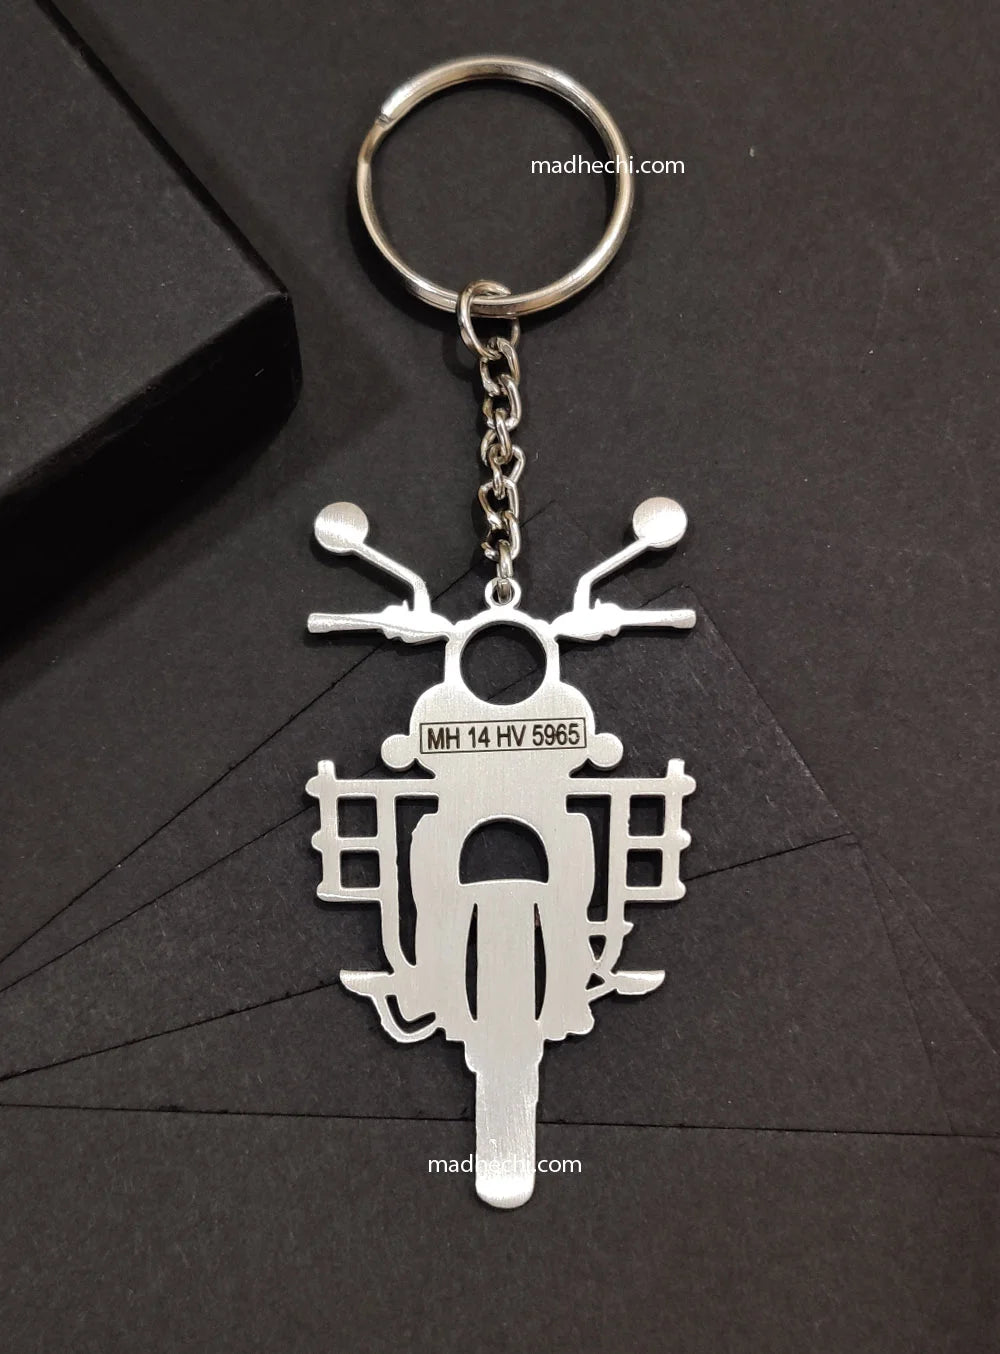 Royal Enfield Classic Customized Keychain (Front)